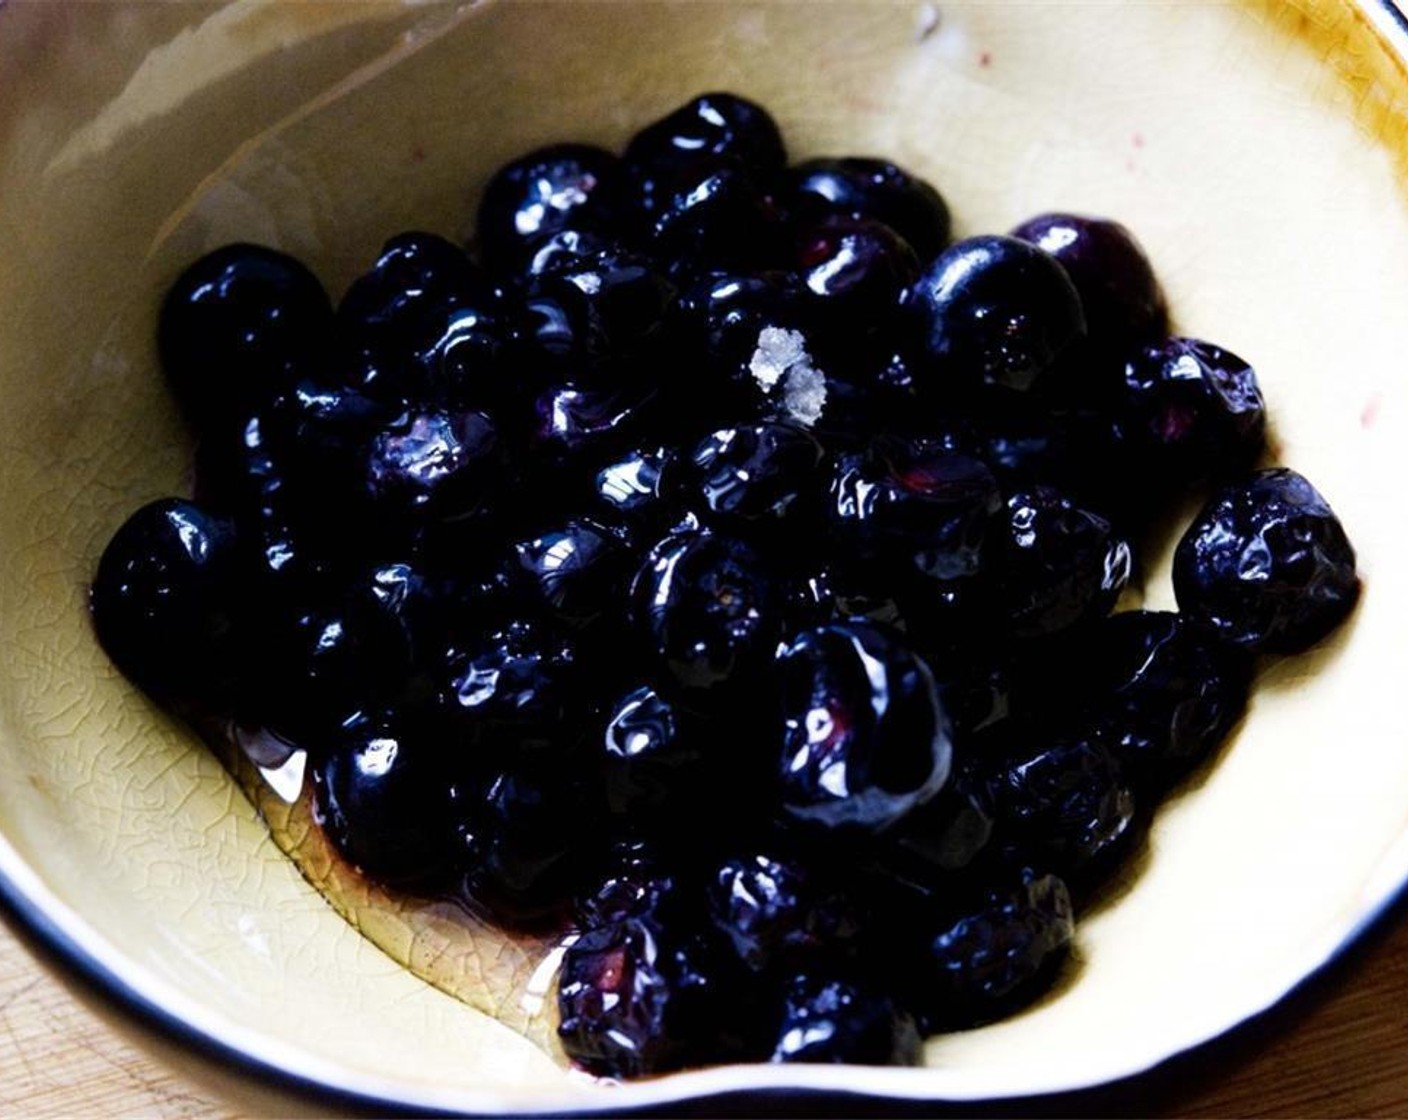 step 1 Take your Frozen Blueberries (1/2 cup) and let them defrost completely. Then, add half of the Honey (1 Tbsp).